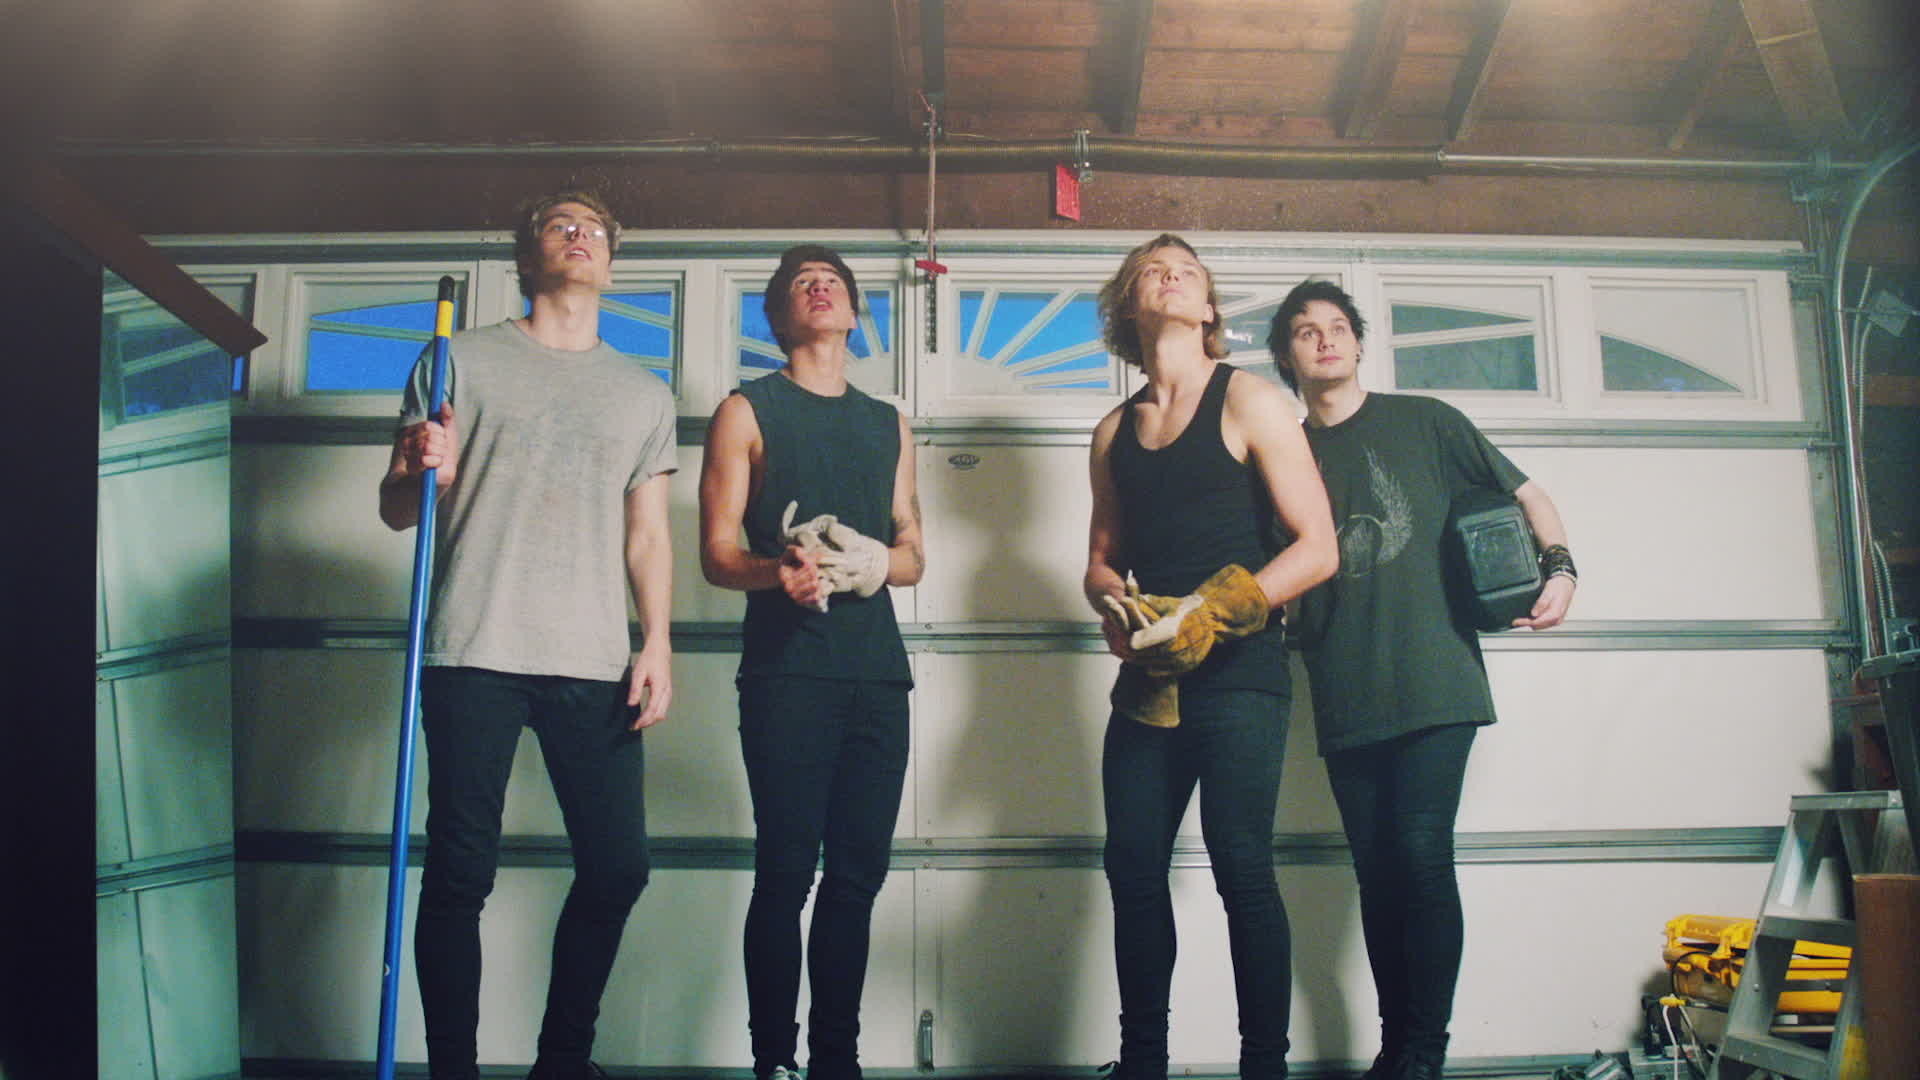 5 Seconds of Summer – She's Kinda Hot Video